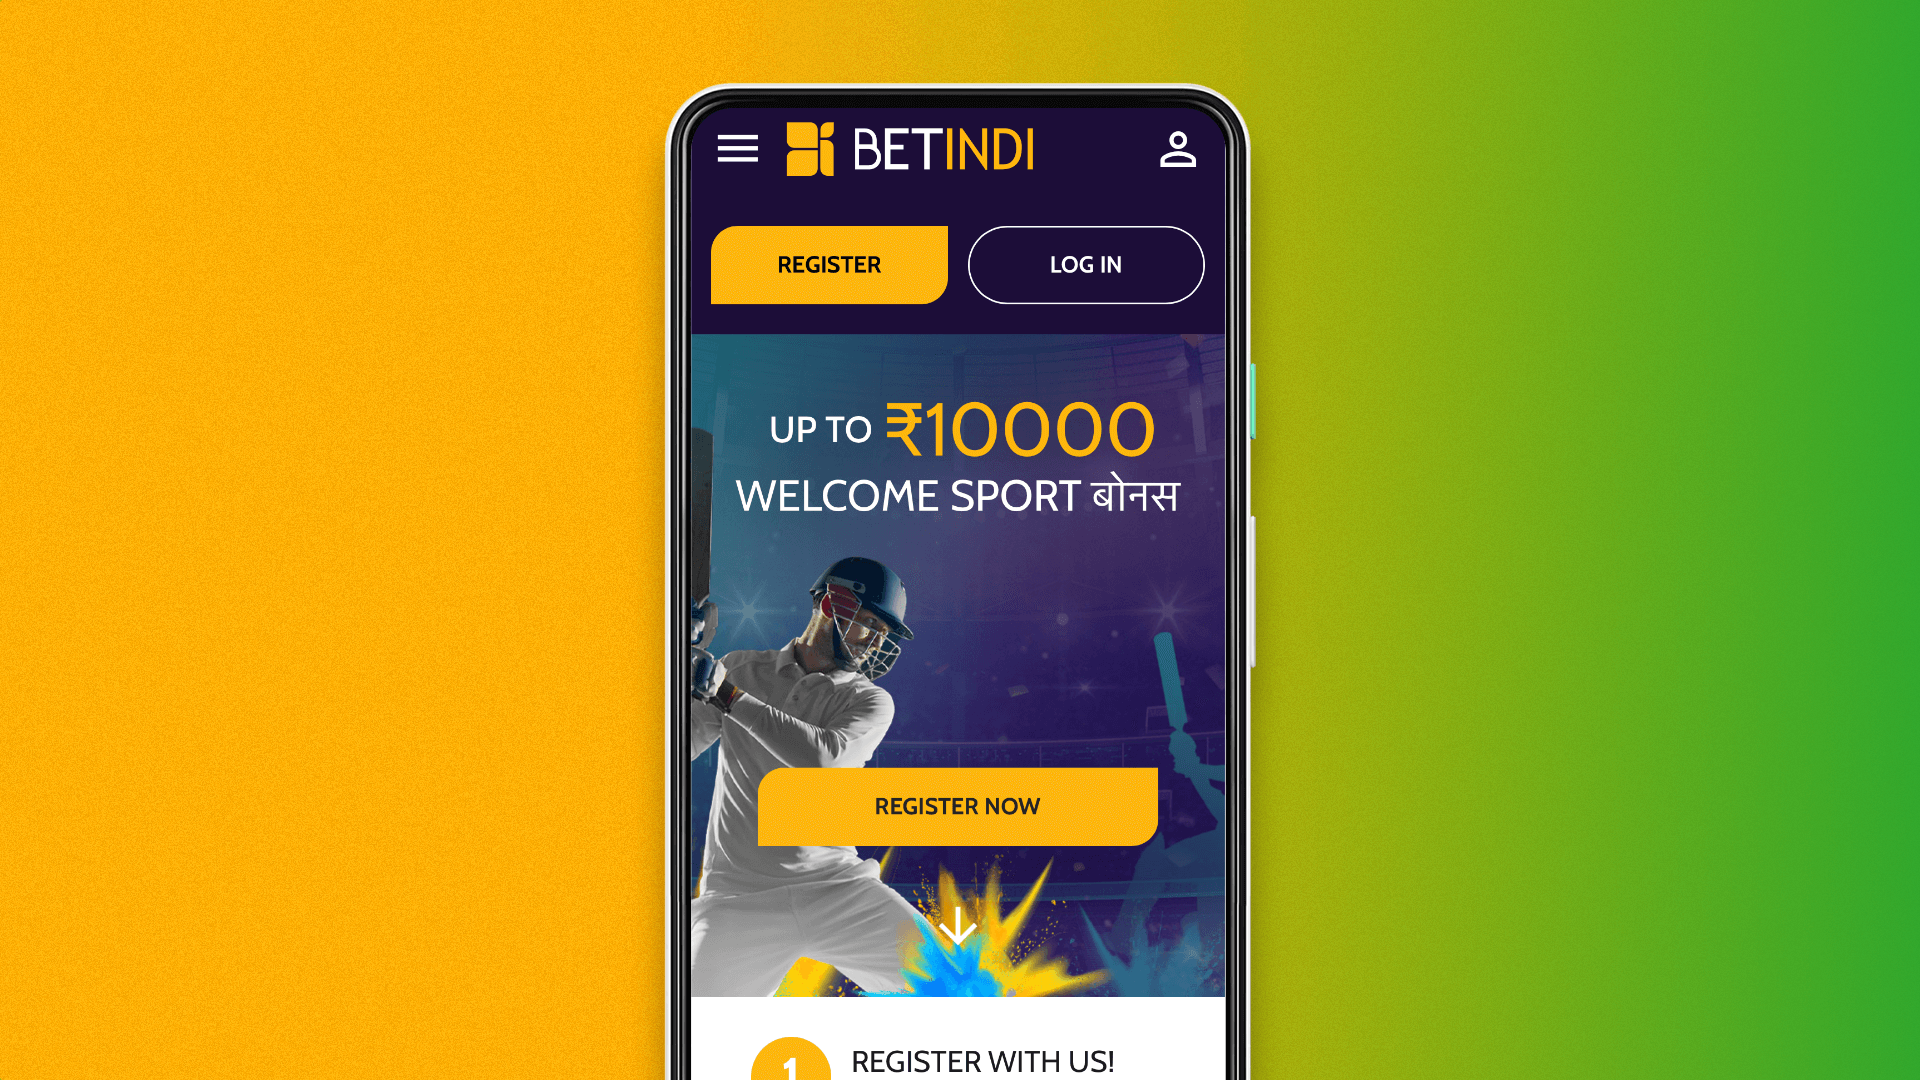 To download Betindi app for Android you need to visit the official website of the betting company